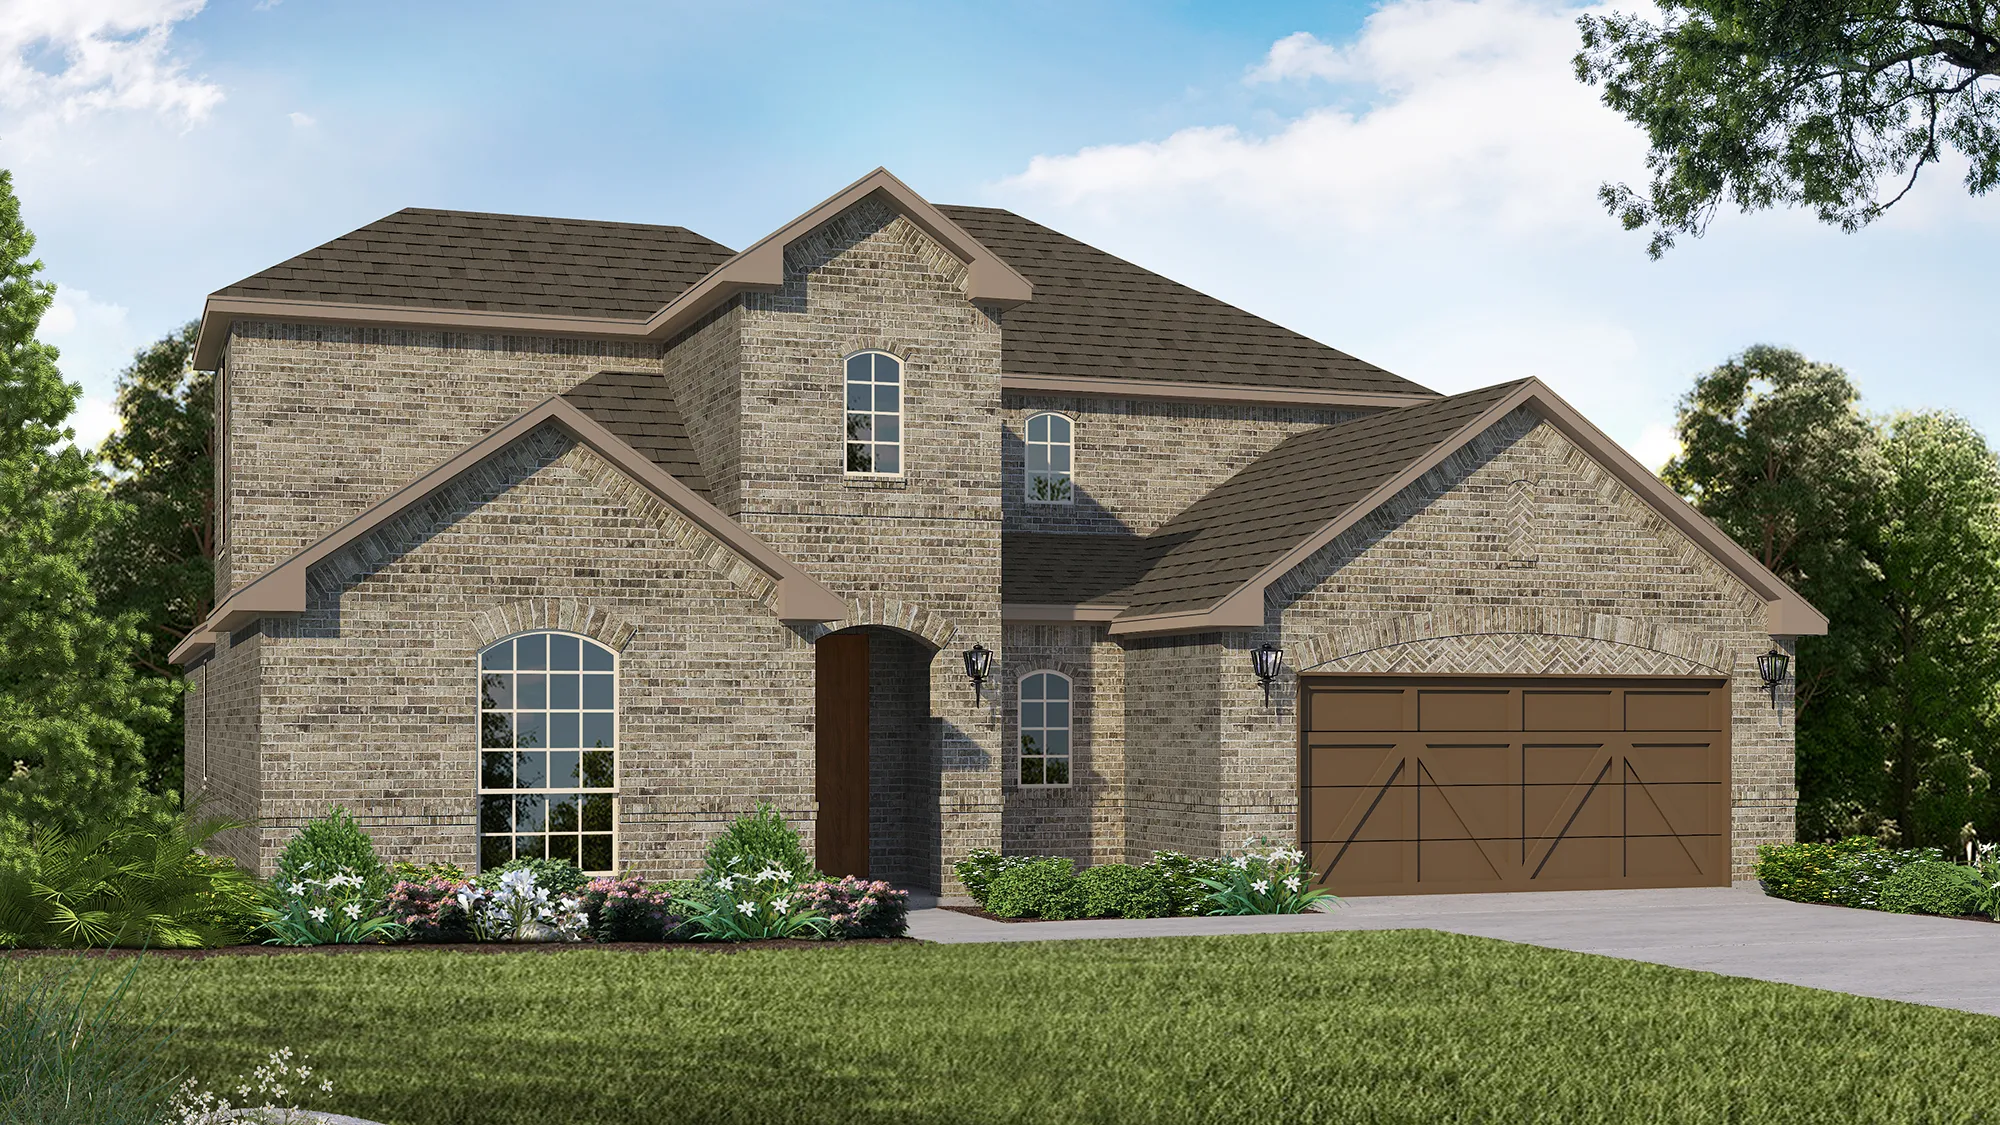 Plan 1684 Elevation A by American Legend Homes